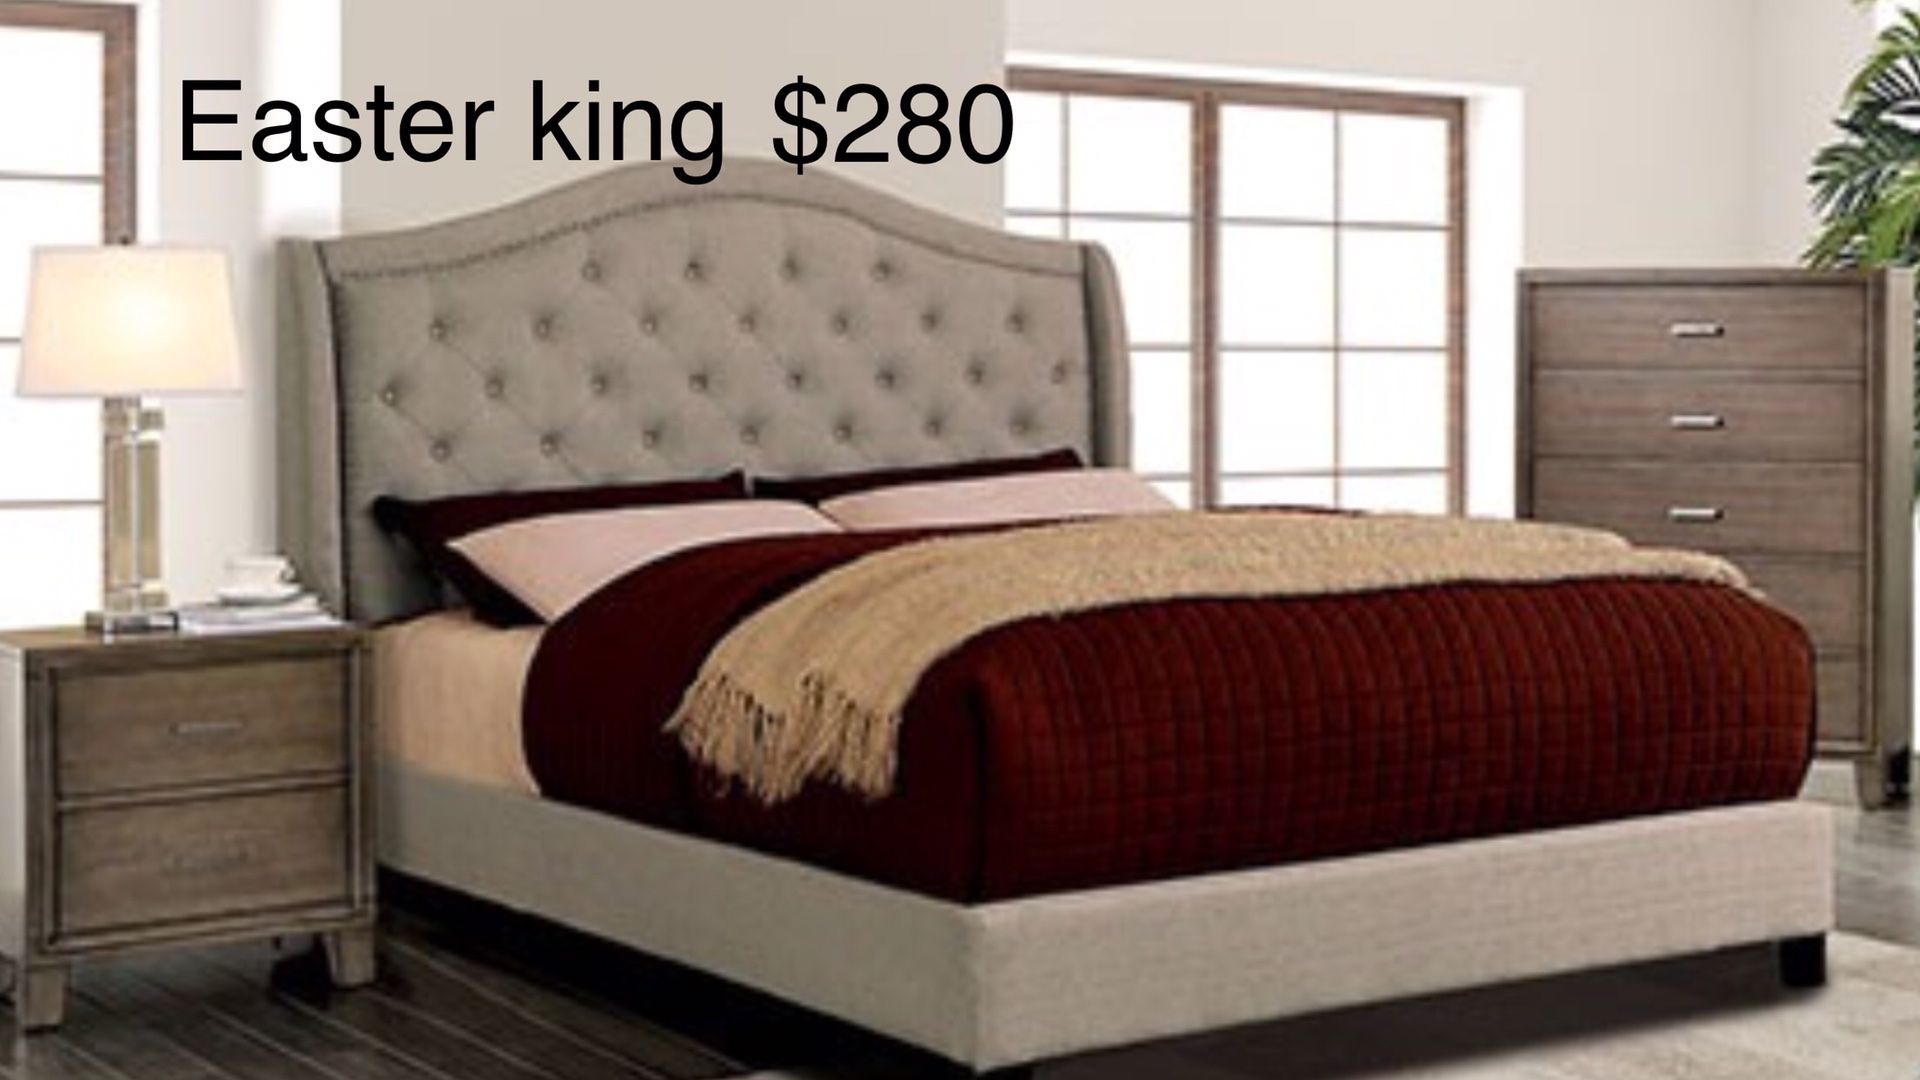 CAL KING NUEVA WN SU CAJA / no incluye colchon / CAL KING NEW IN BOX / only bed frame